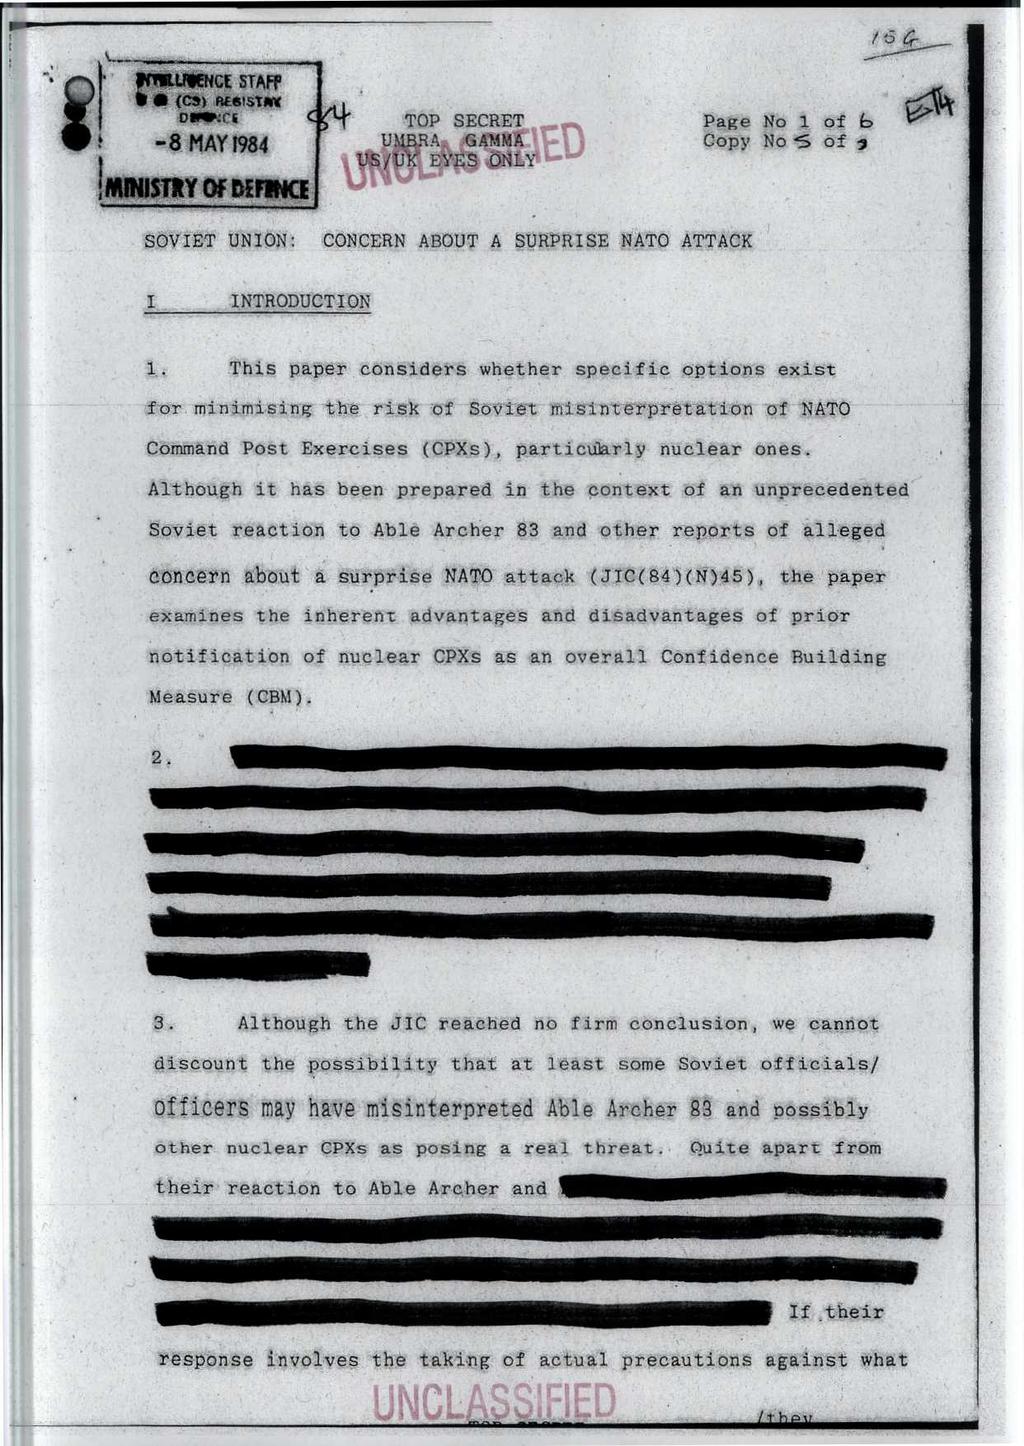 I. U MCE STAFF i (ca) Rf6istMV onpr:ck -8 MAY 1984 Page No 1 of 6 Copy No -S of y i / UK' EYES ONLY r!minismy Of Df $ CE SOVIET UNION : CONCERN ABOUT A SURPRISE NATO ATTACK INTRODUCTION 11.